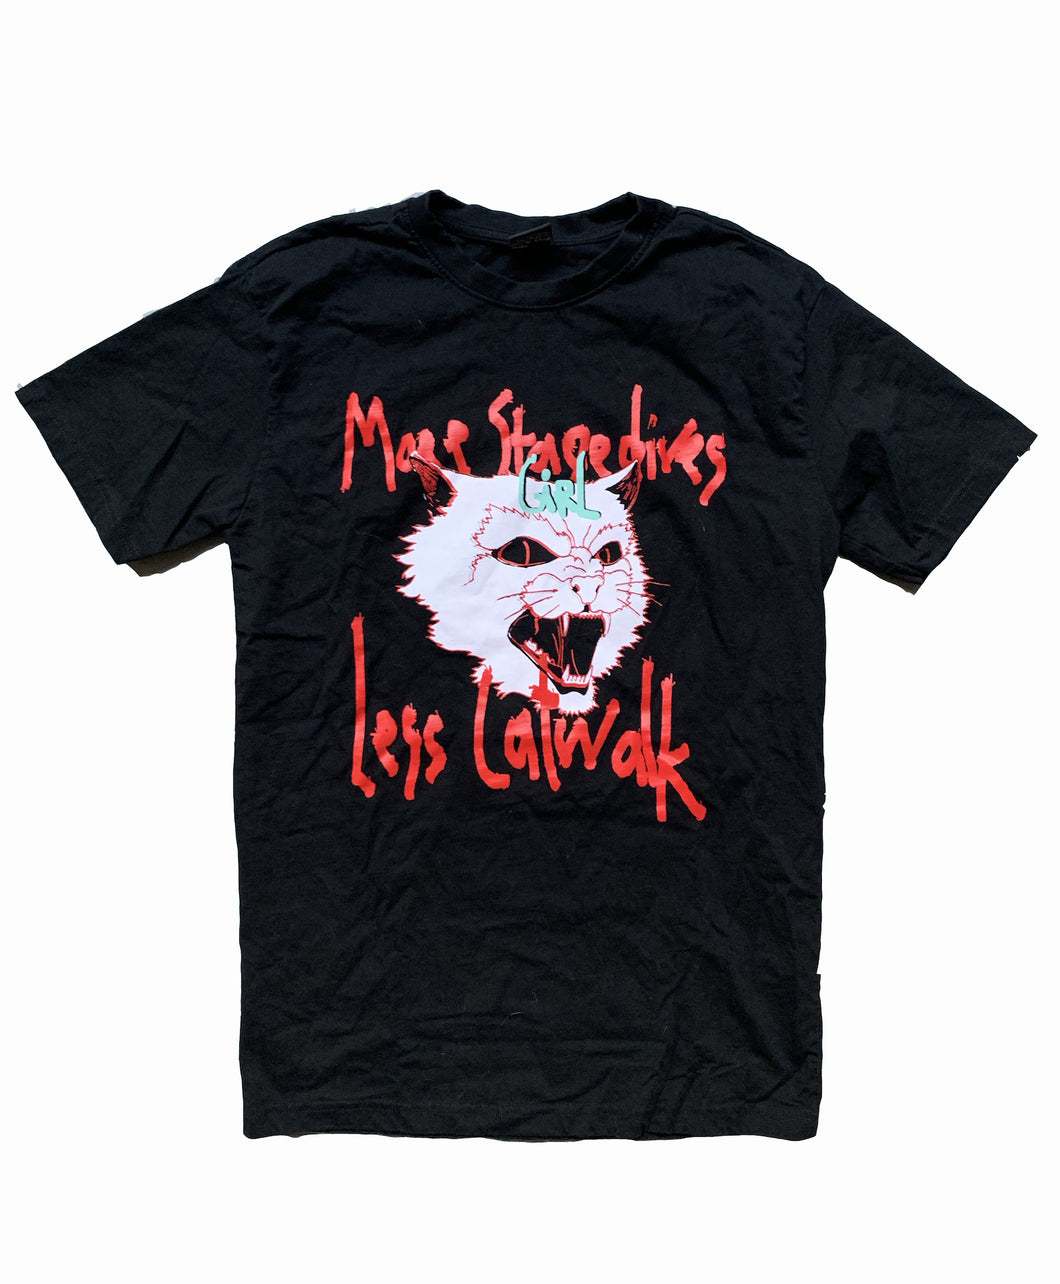 T-Shirt More Stagedives Black Red